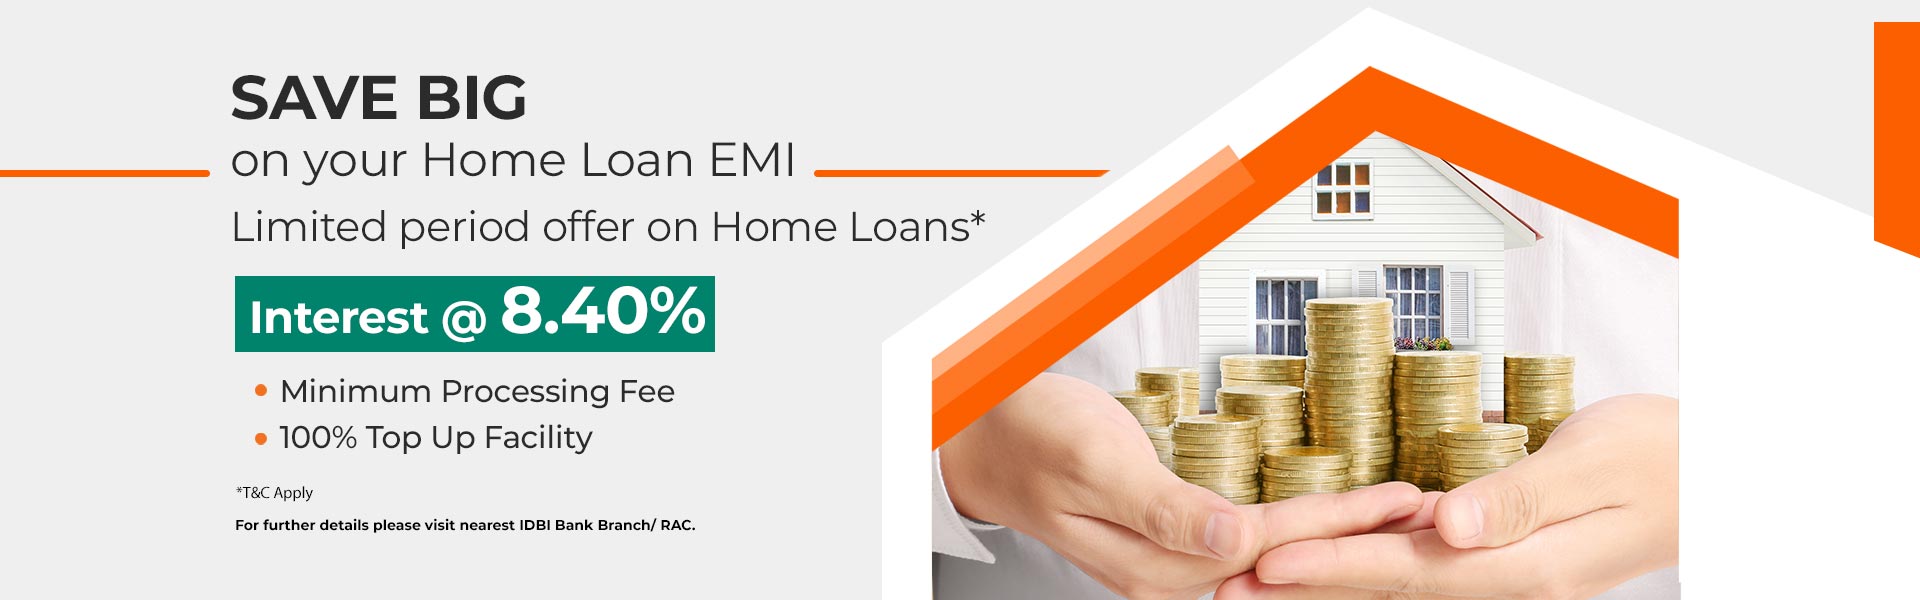 Home loan buy your dream home today with IDBI bank home loan